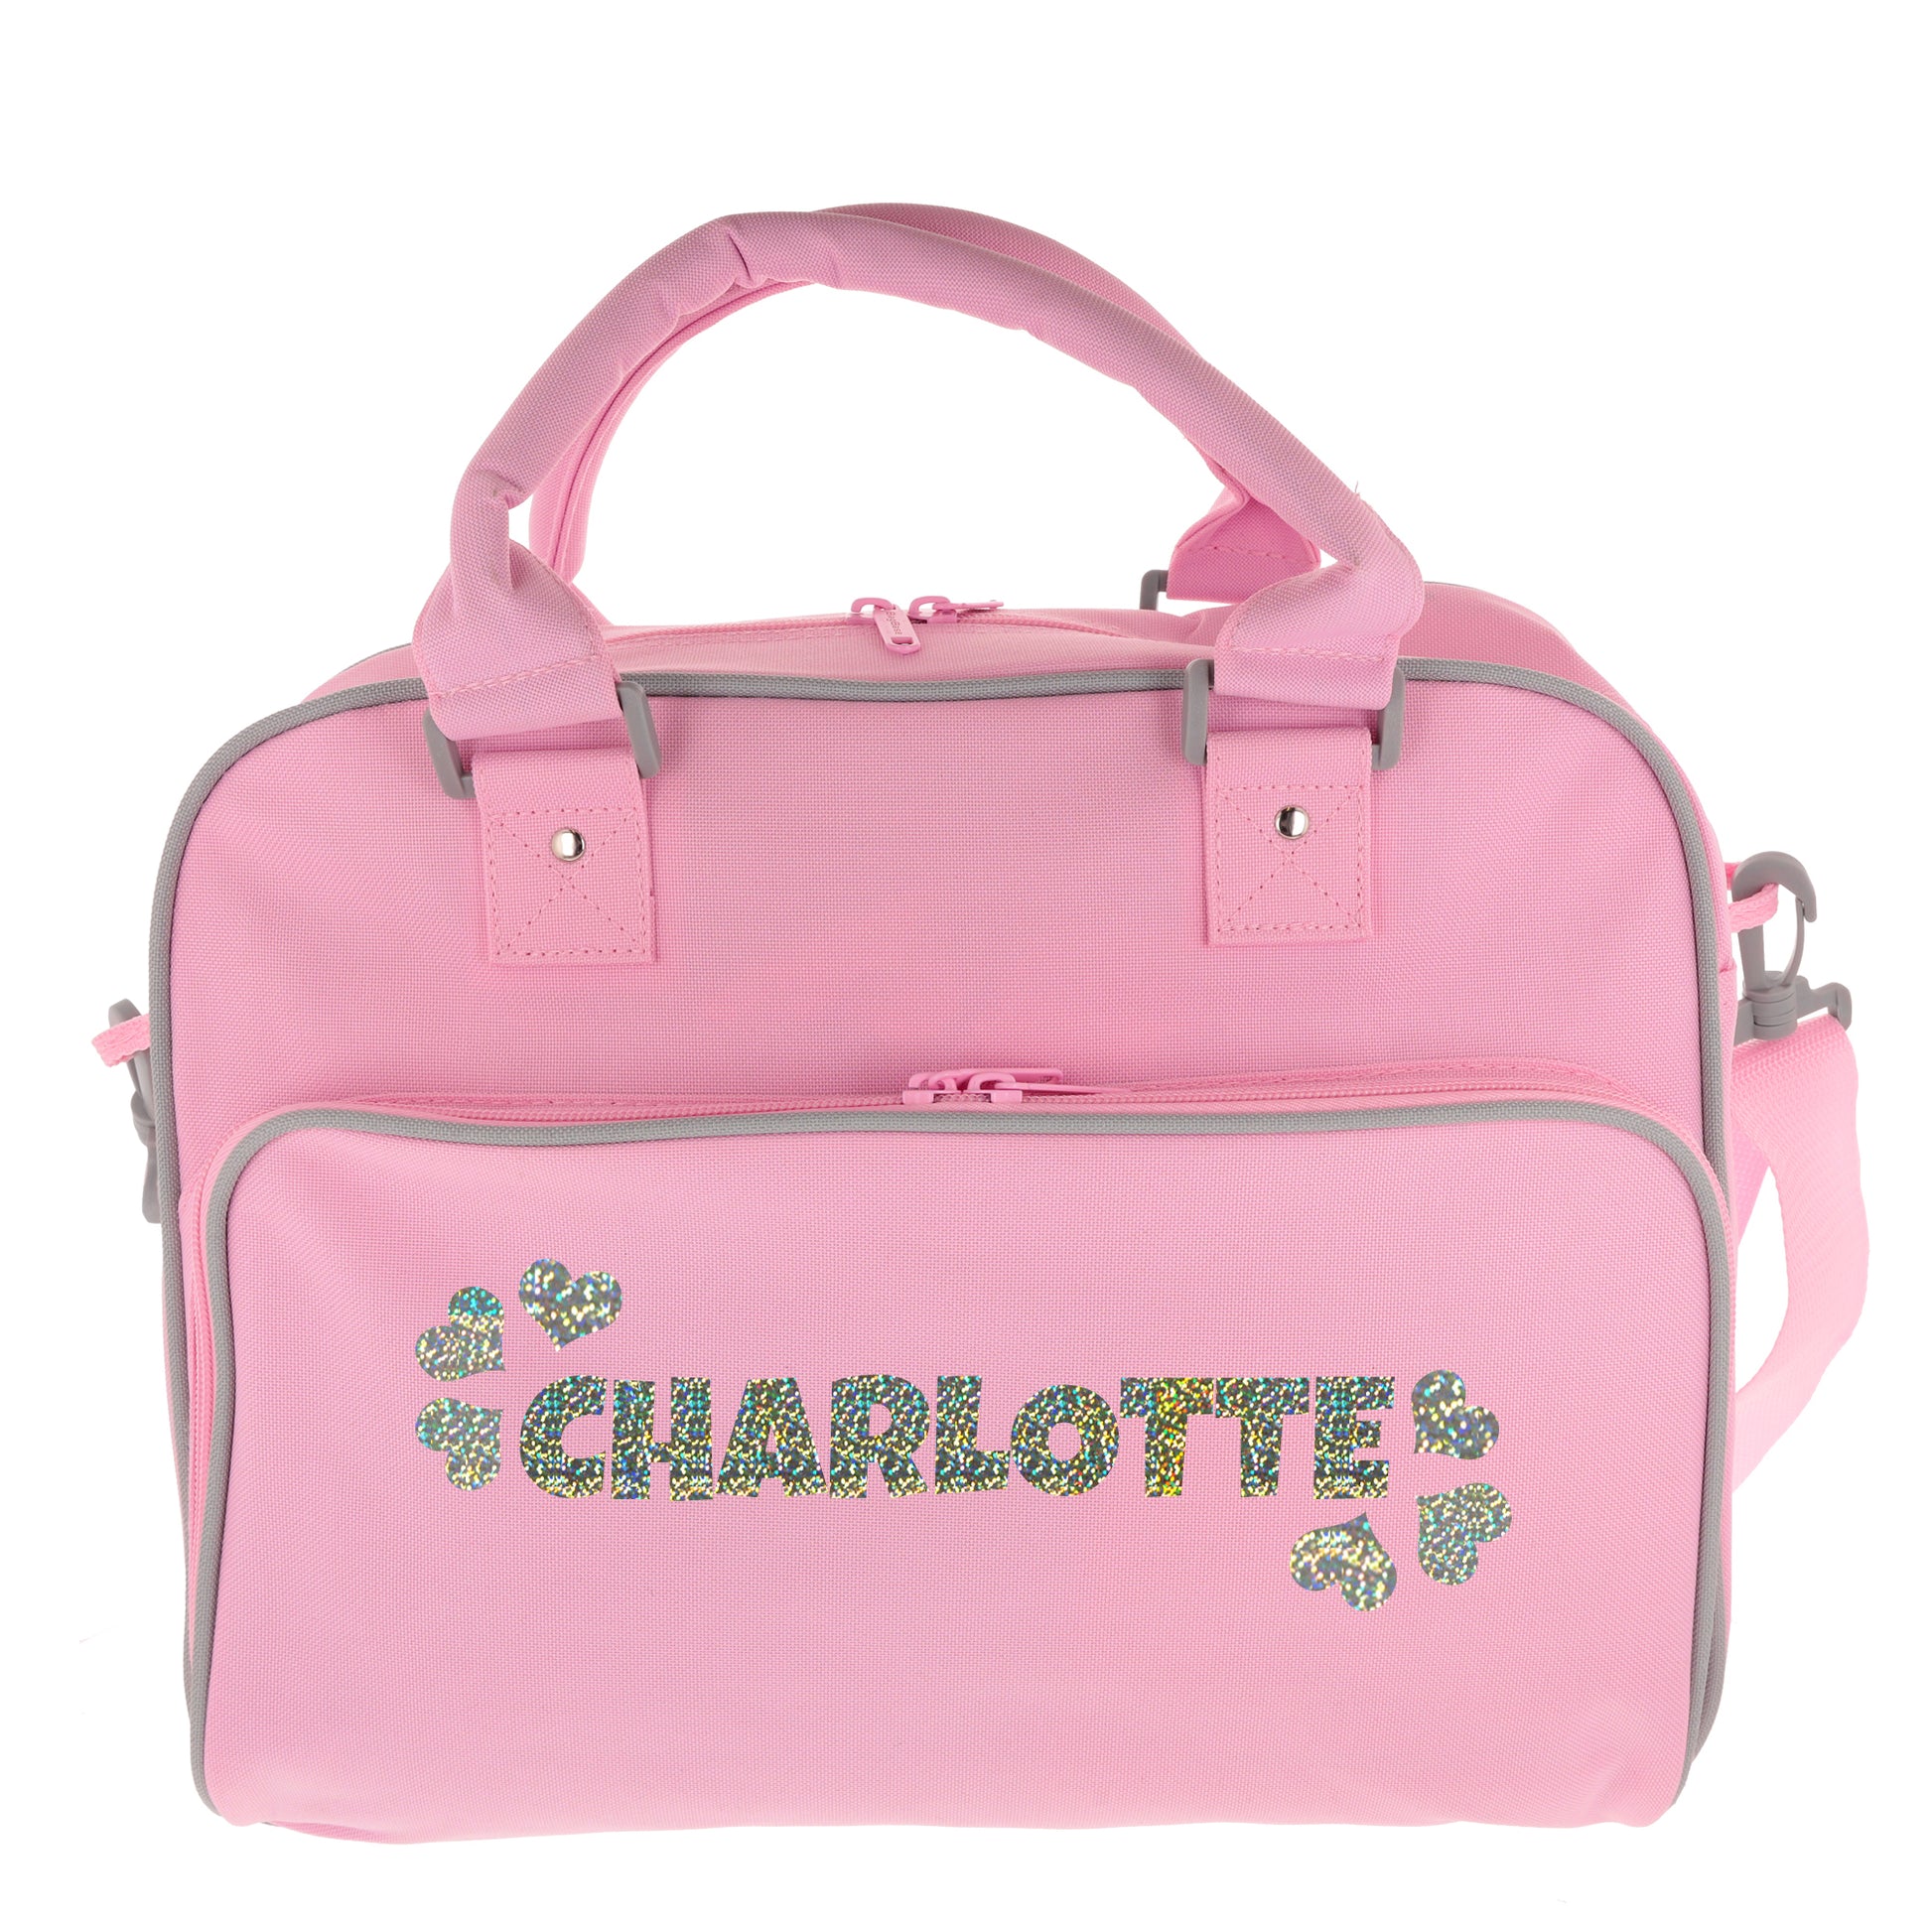 Personalised Girls Sports Bag with Name Dancing Swimming Gymnastic School Gym Bag  - Always Looking Good - Pale Pink Name & Hearts 